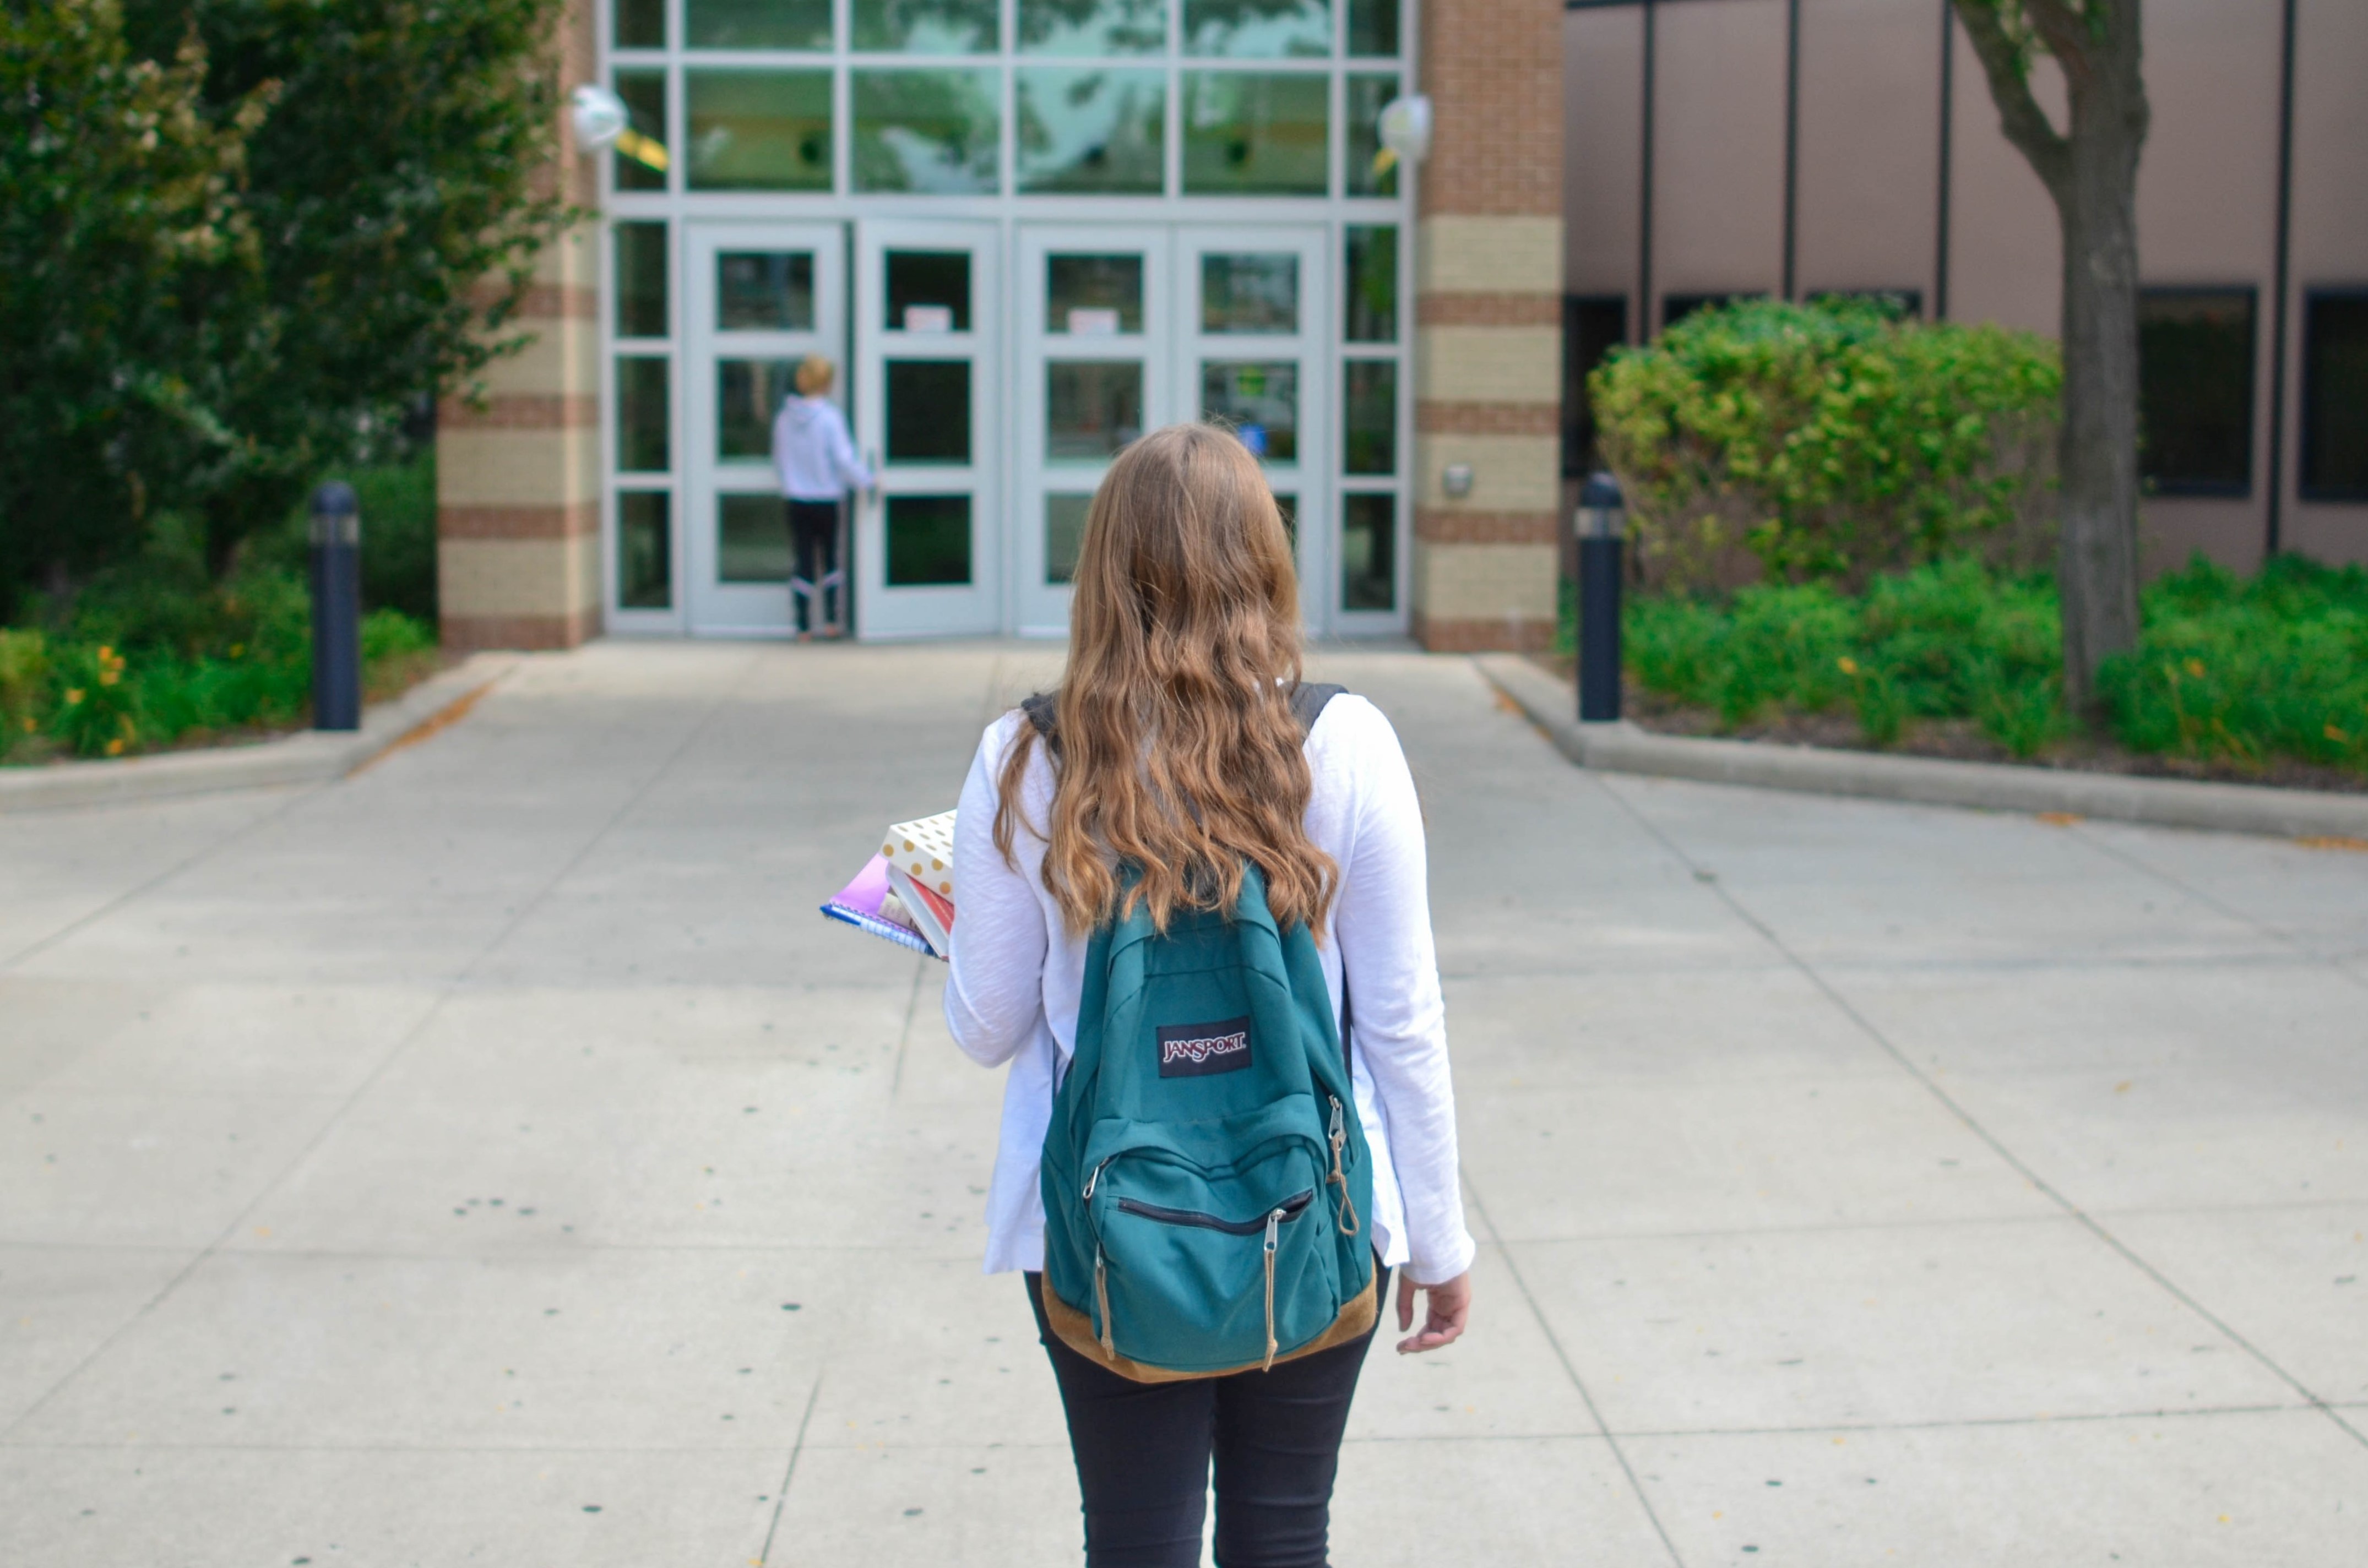 Student wearing teal backpack and holding books stands in front of school entrance